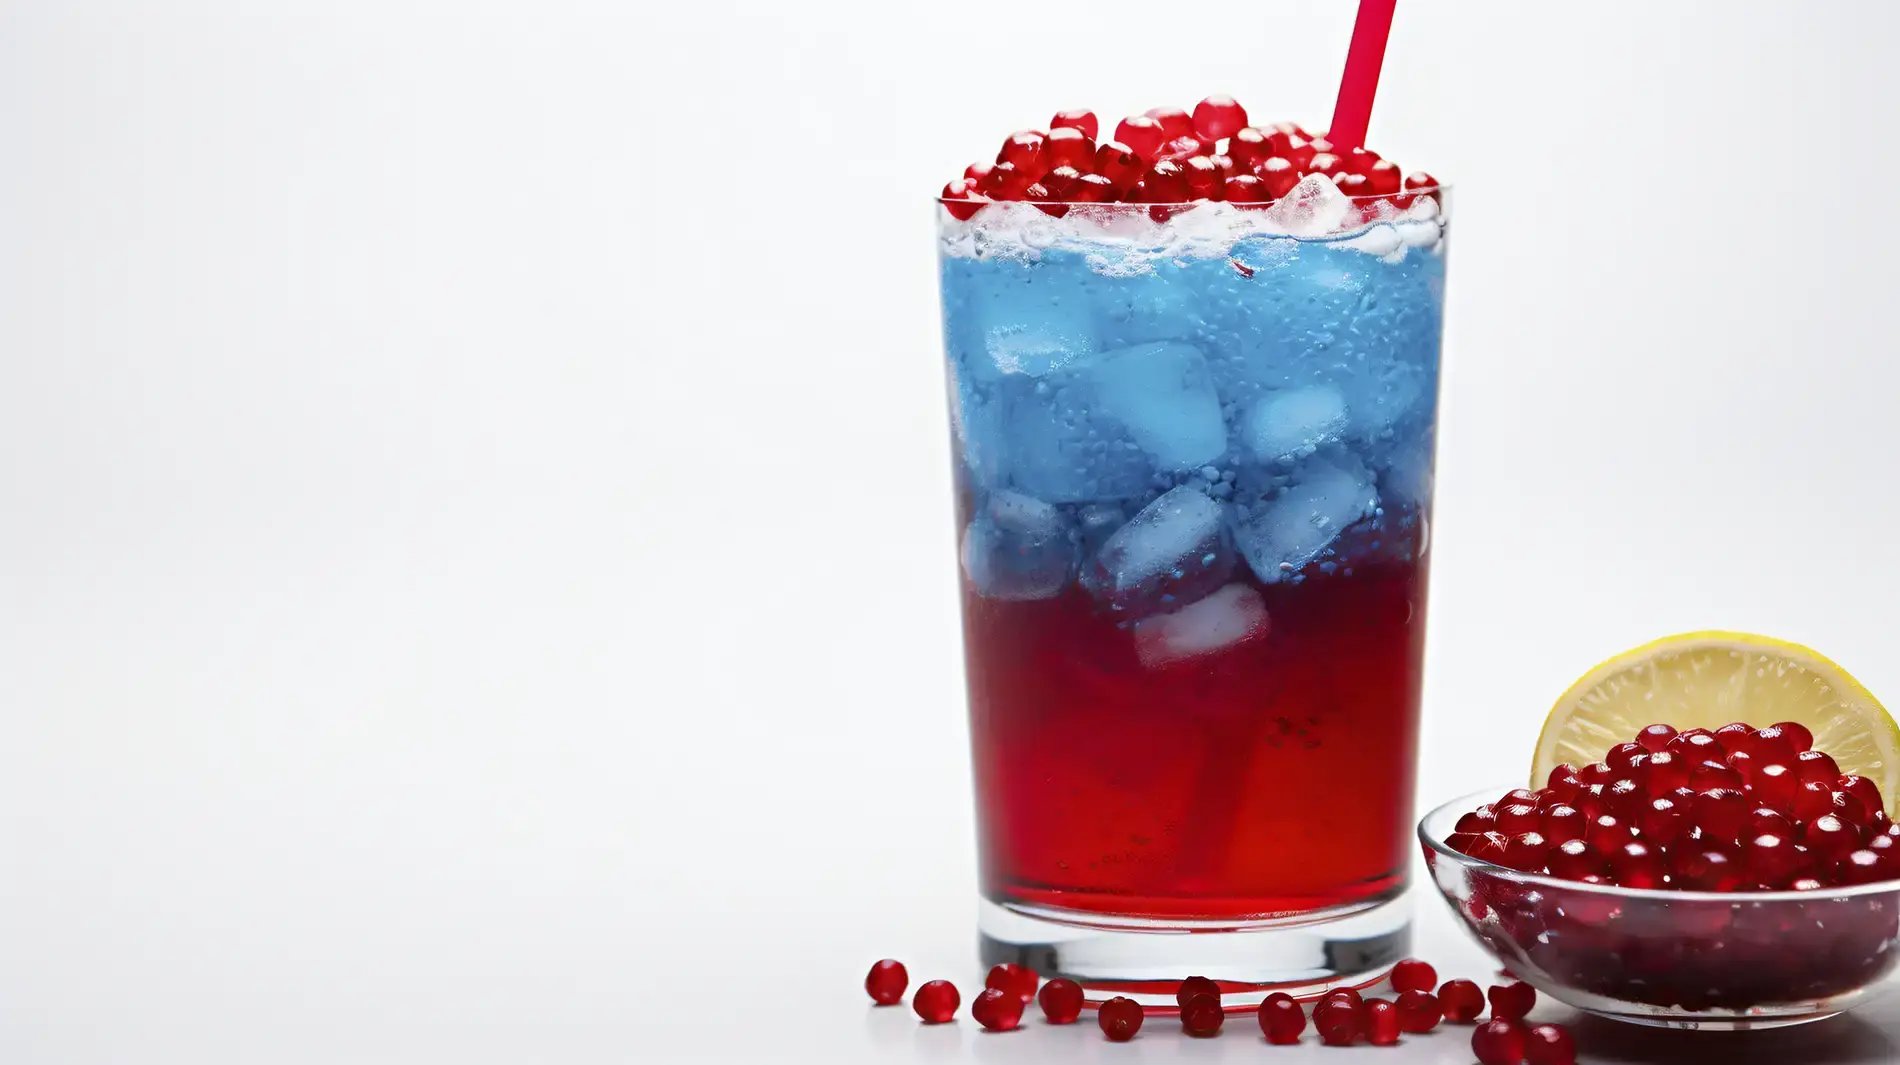 A red, white, and blue cocktail or mocktail using a lemeon wheel garnish with pomegranate